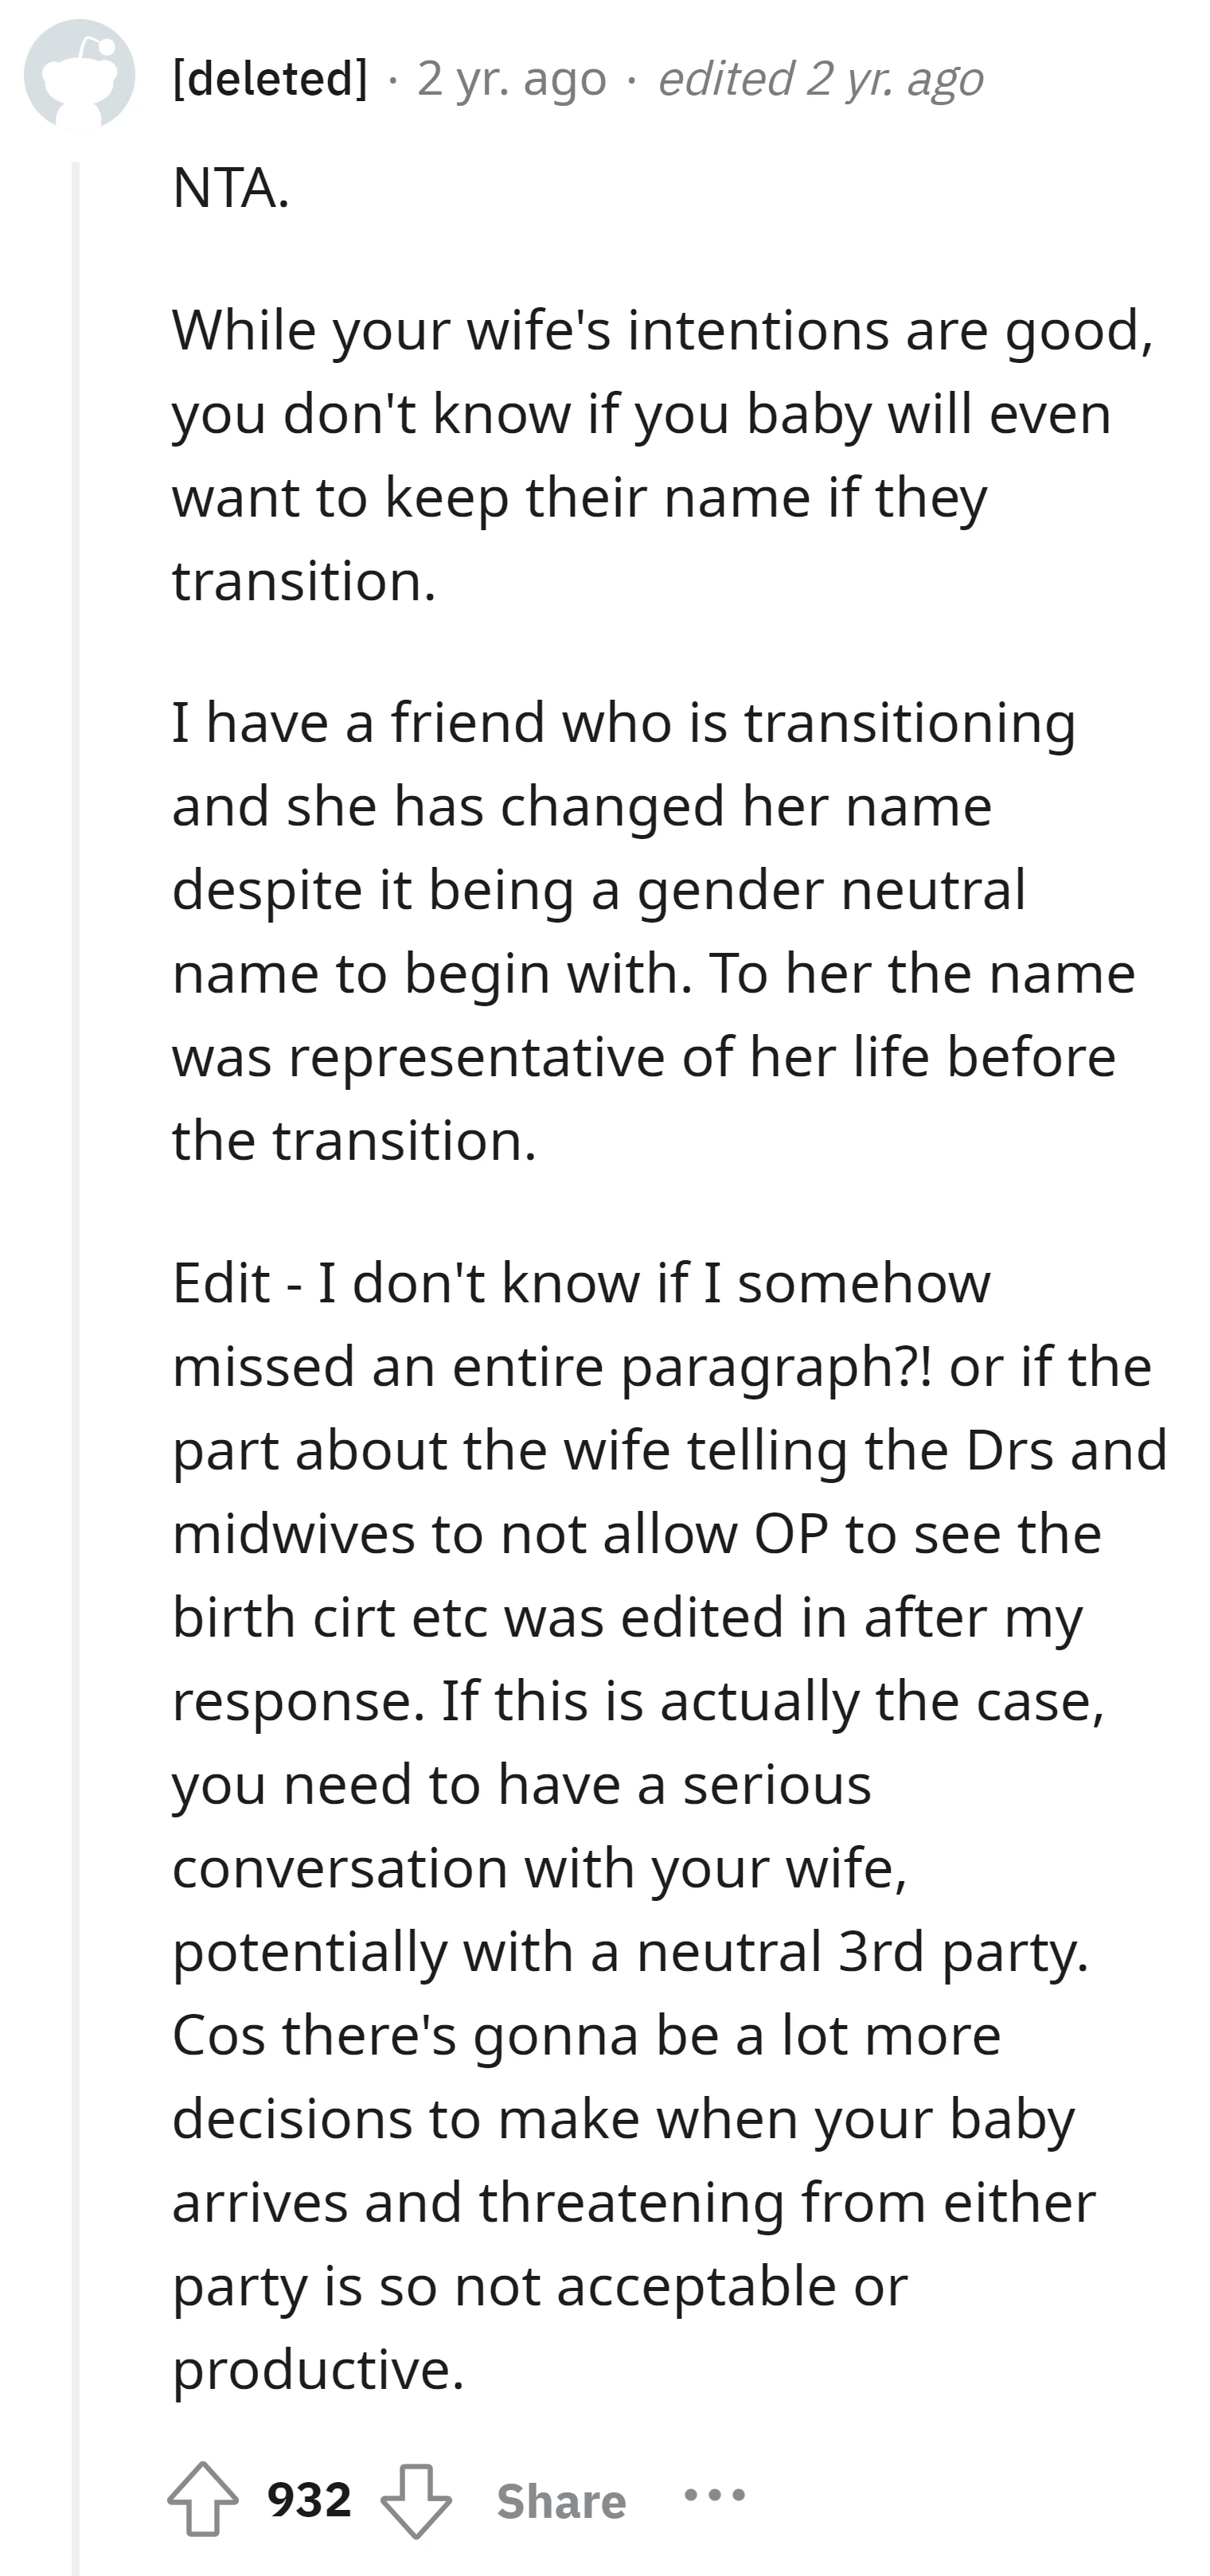 OP should concern over the wife's threat to exclude him from birth certificate decisions